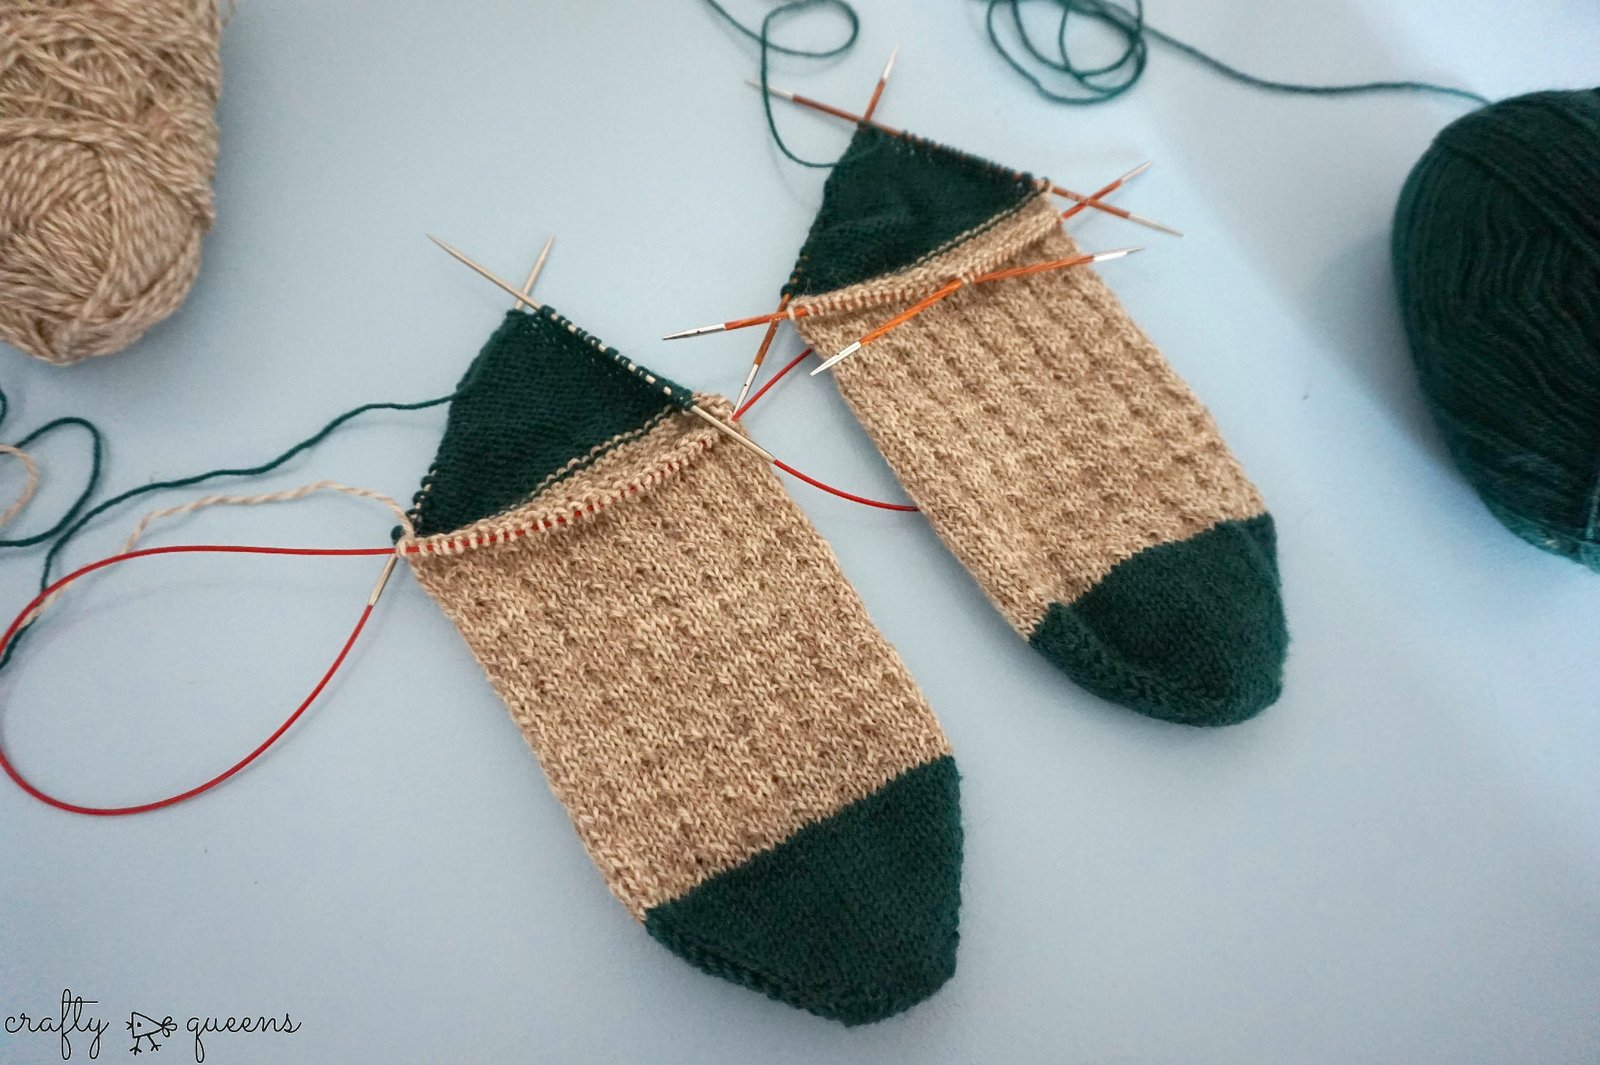 Two partially knit socks laying side by side, using different types of knitting needles